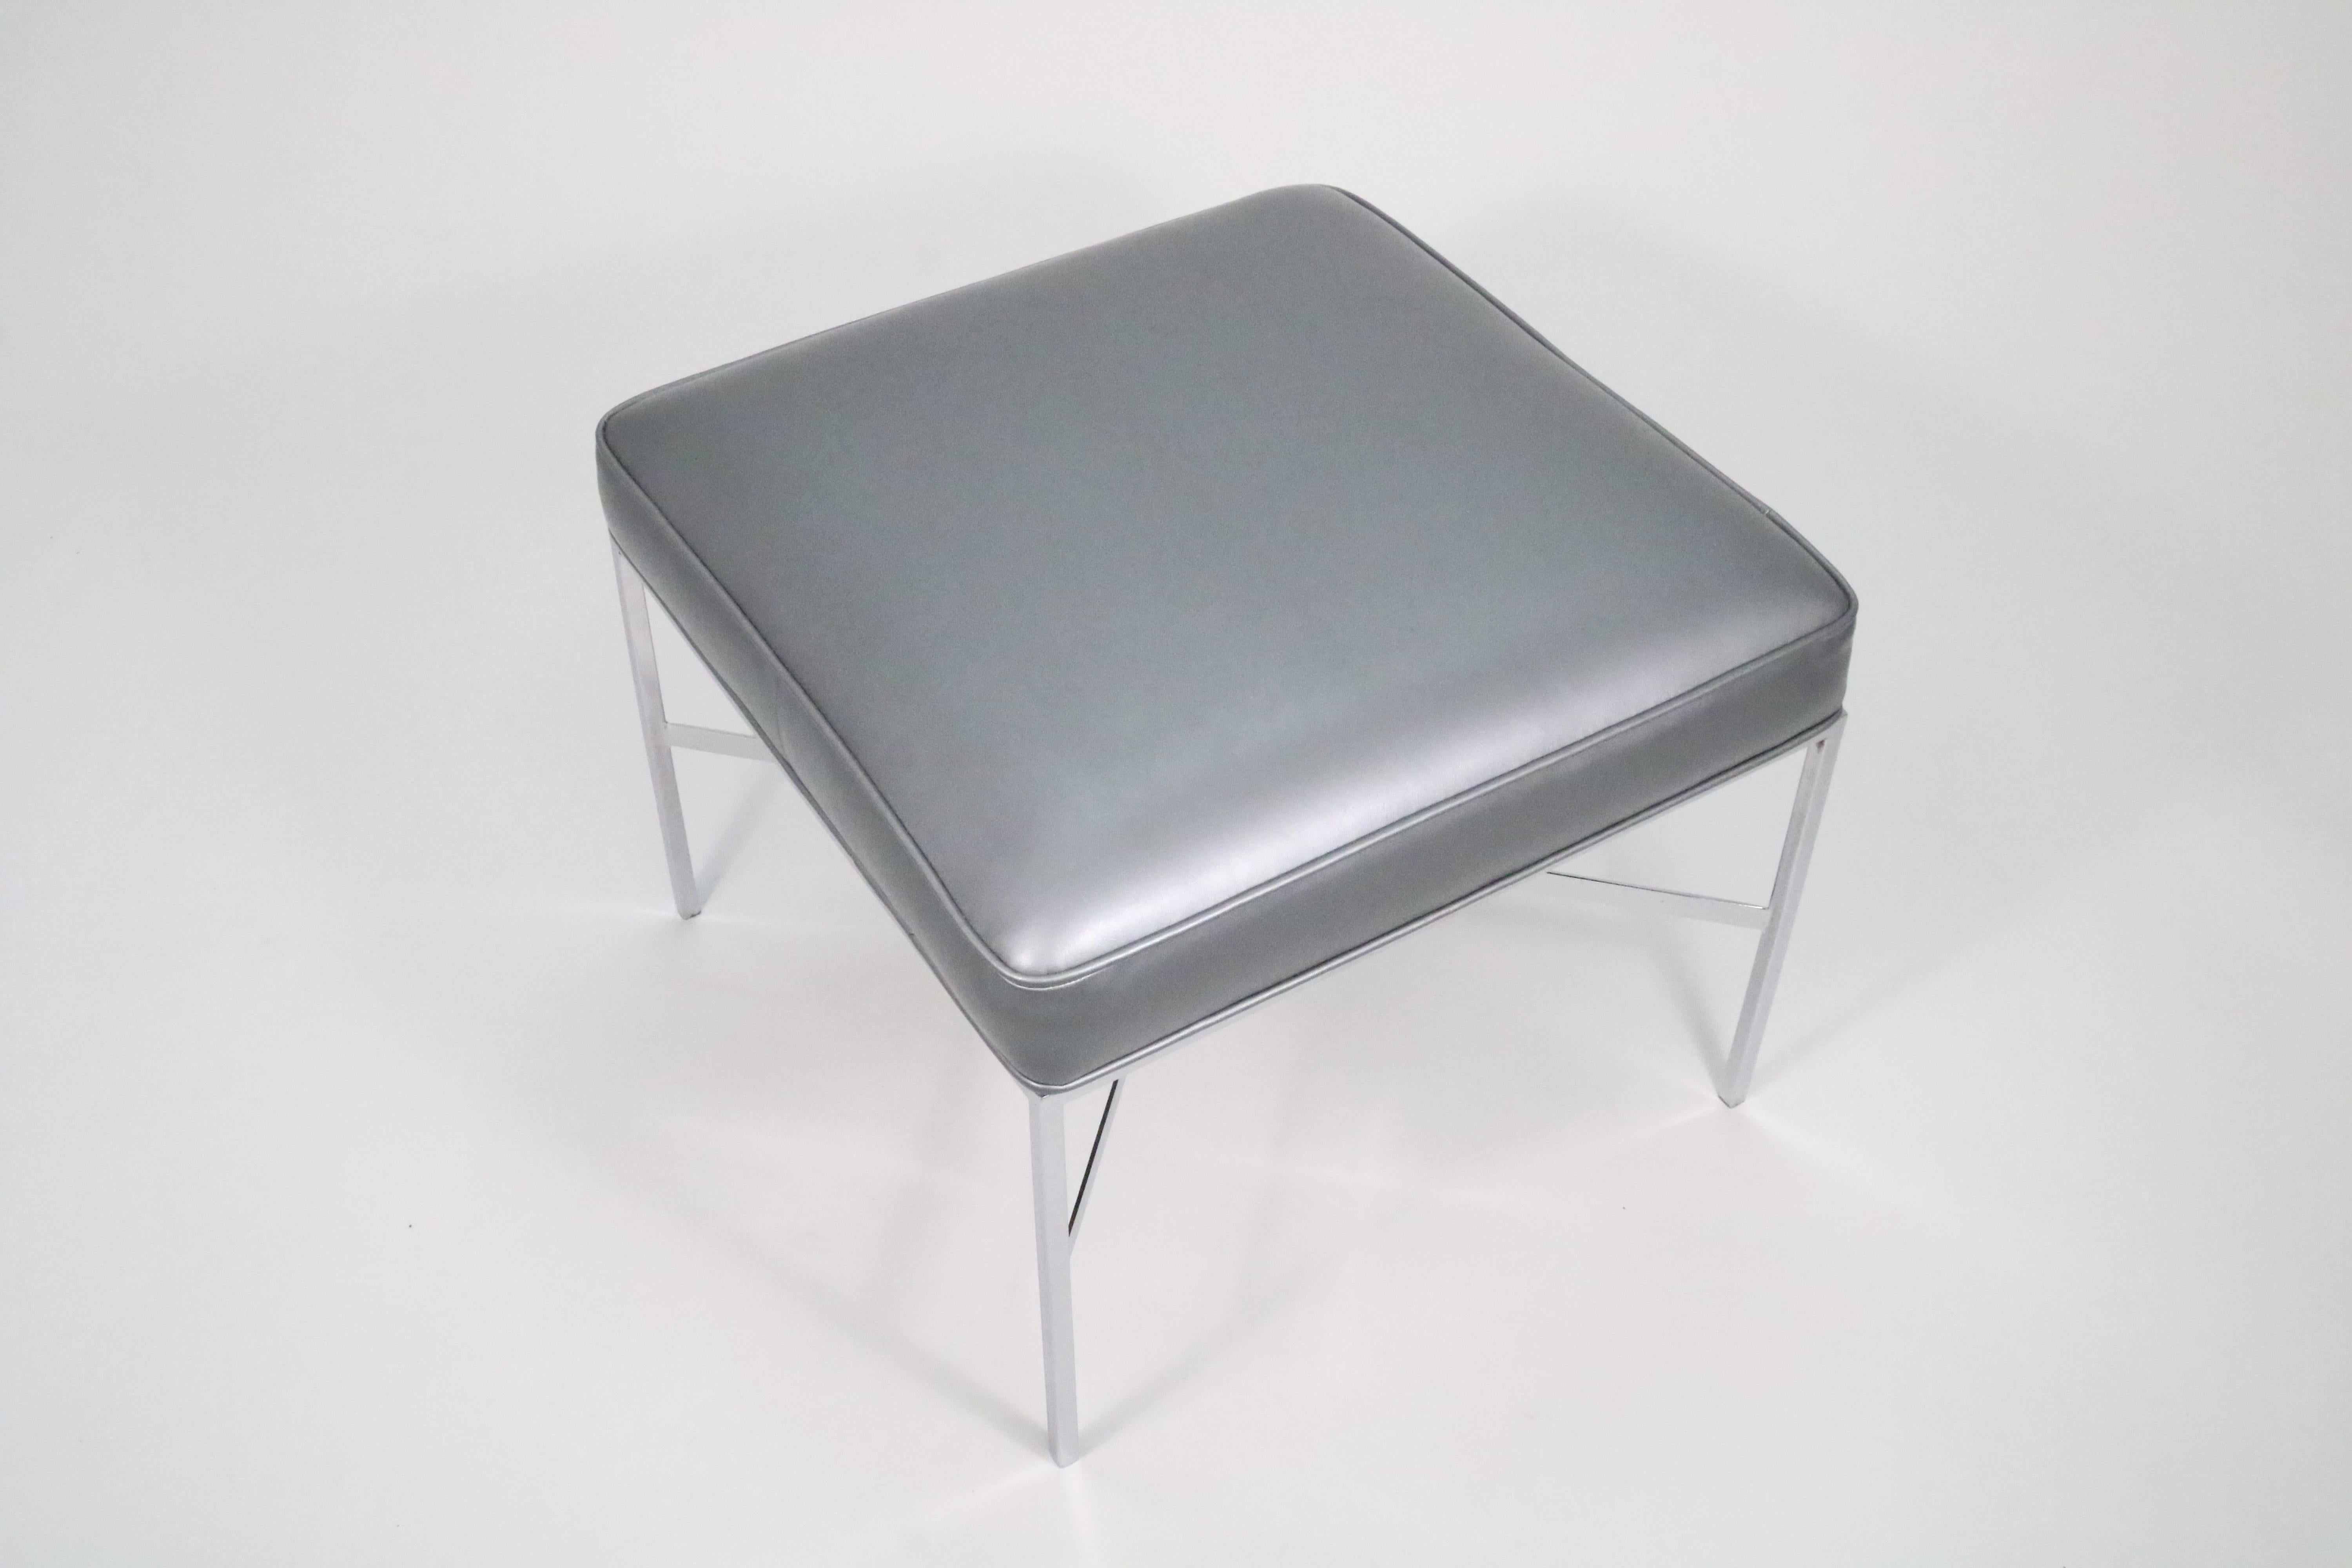 A Paul McCobb classic, this X-base stool is his timeless design for Calvin Furniture. Elegant without being fussy, refined without feeling precious, and like so much of his work, perfectly proportioned. 

This is a rare polished chrome edition